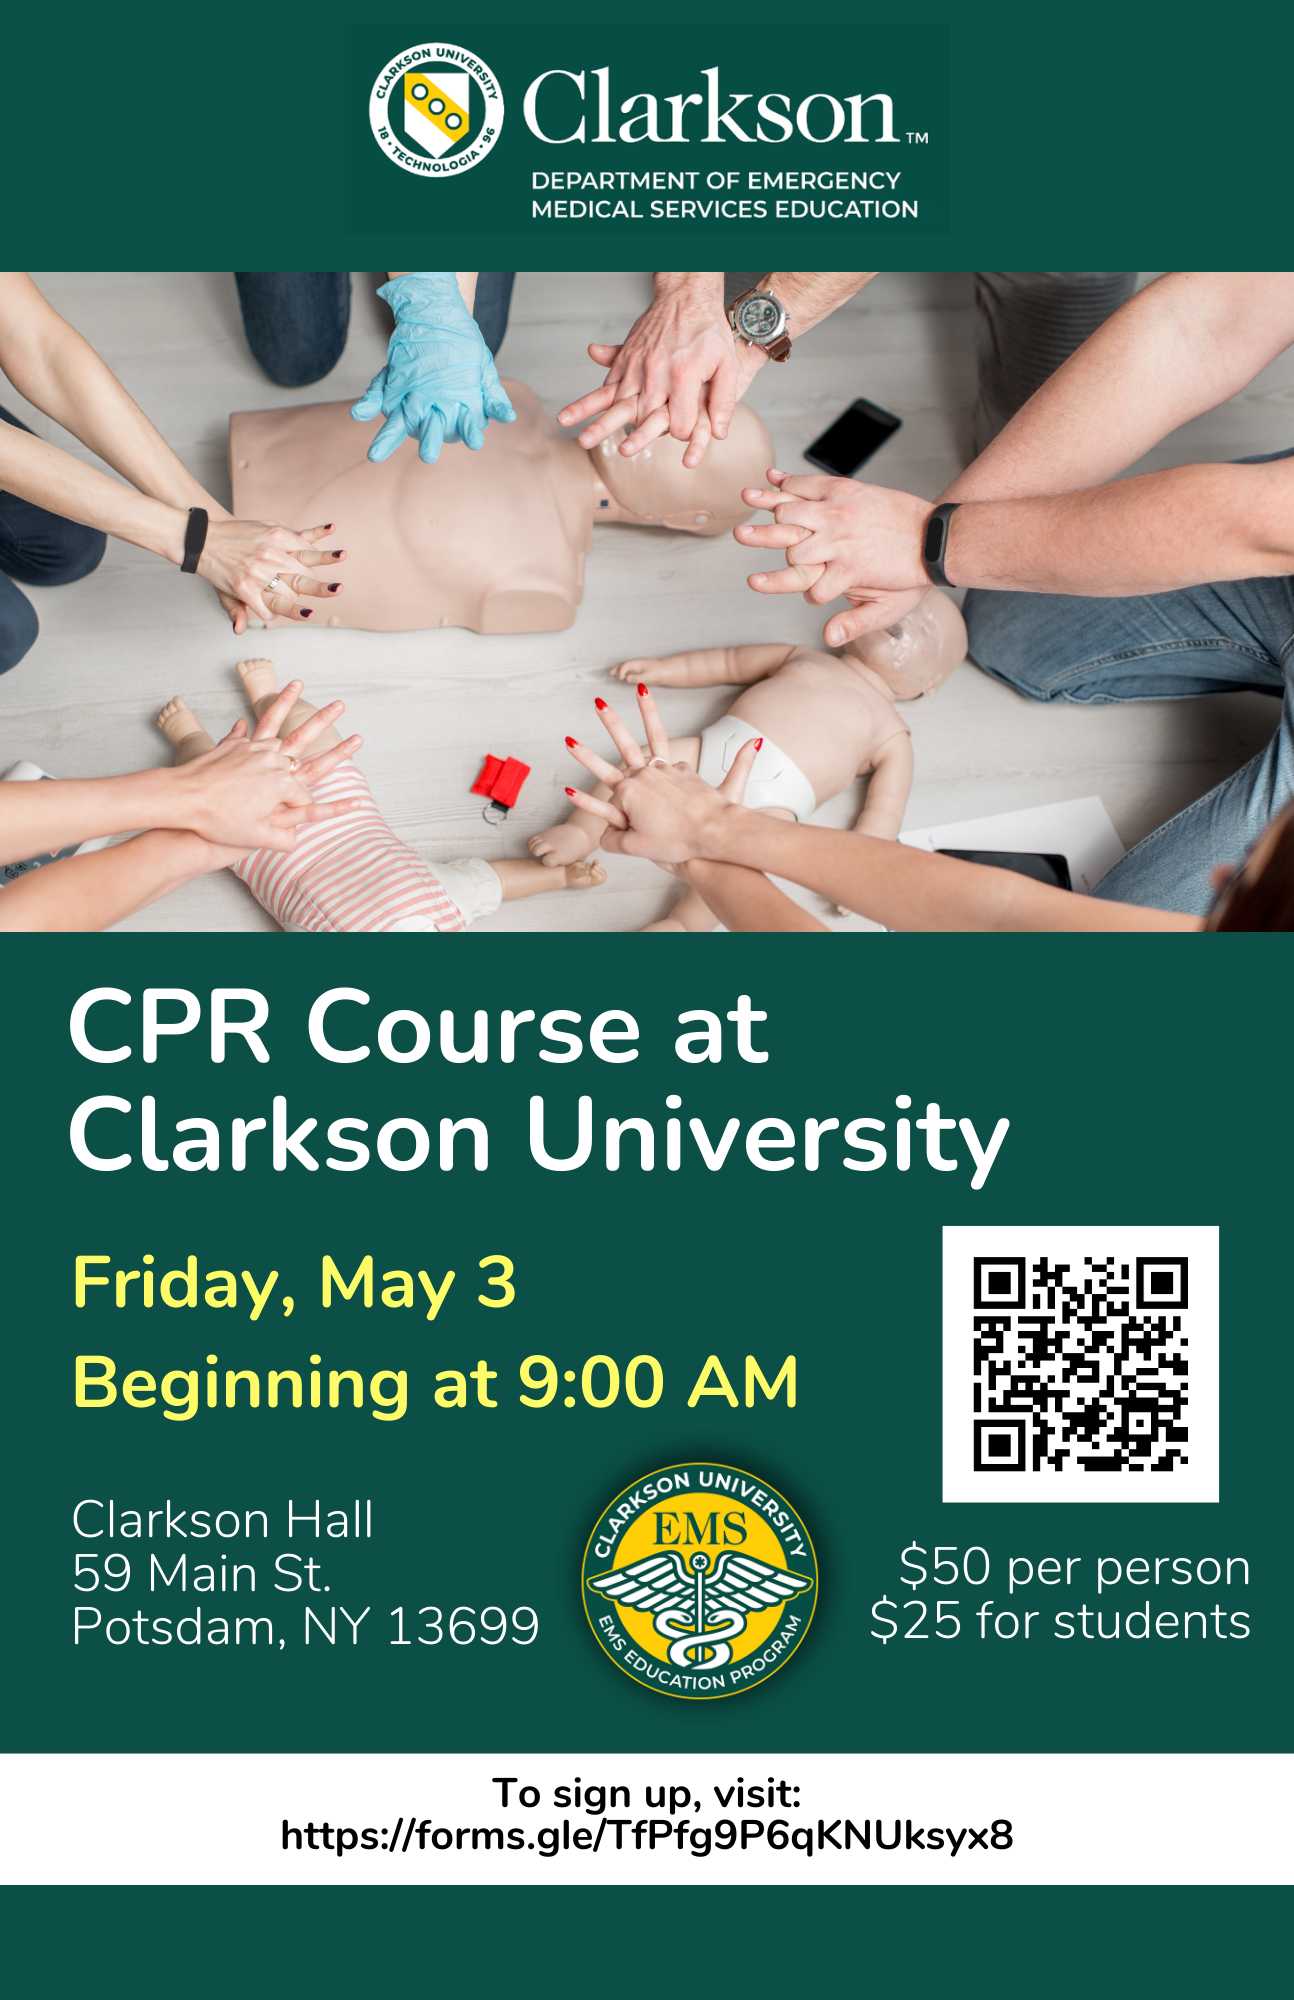 A green flyer displays the Clarkson Department of Emergency Medical Services Education logo at the top, under which an image of people's hands practicing CPR on baby dolls is shown. Underneath the image reads: CPR Course at Clarkson University Friday May 3 Beginning at 9 a.m. Clarkson Hall 59 Main St. Potsdam NY 13699 $50 per person $25 for students. Flyer also includes a QR code that links to https://docs.google.com/forms/u/1/d/e/1FAIpQLSdzwIRm9ImfuwTM1pT0W1CbasAPlKtS5cMmnO_hm5cRj4gJTg/viewform?usp=send_form, also included is the Clarkson University EMS logo and at the bottom it reads To Sign up, visit https://forms.gle/TfPfg9P6qKNUksyx8.